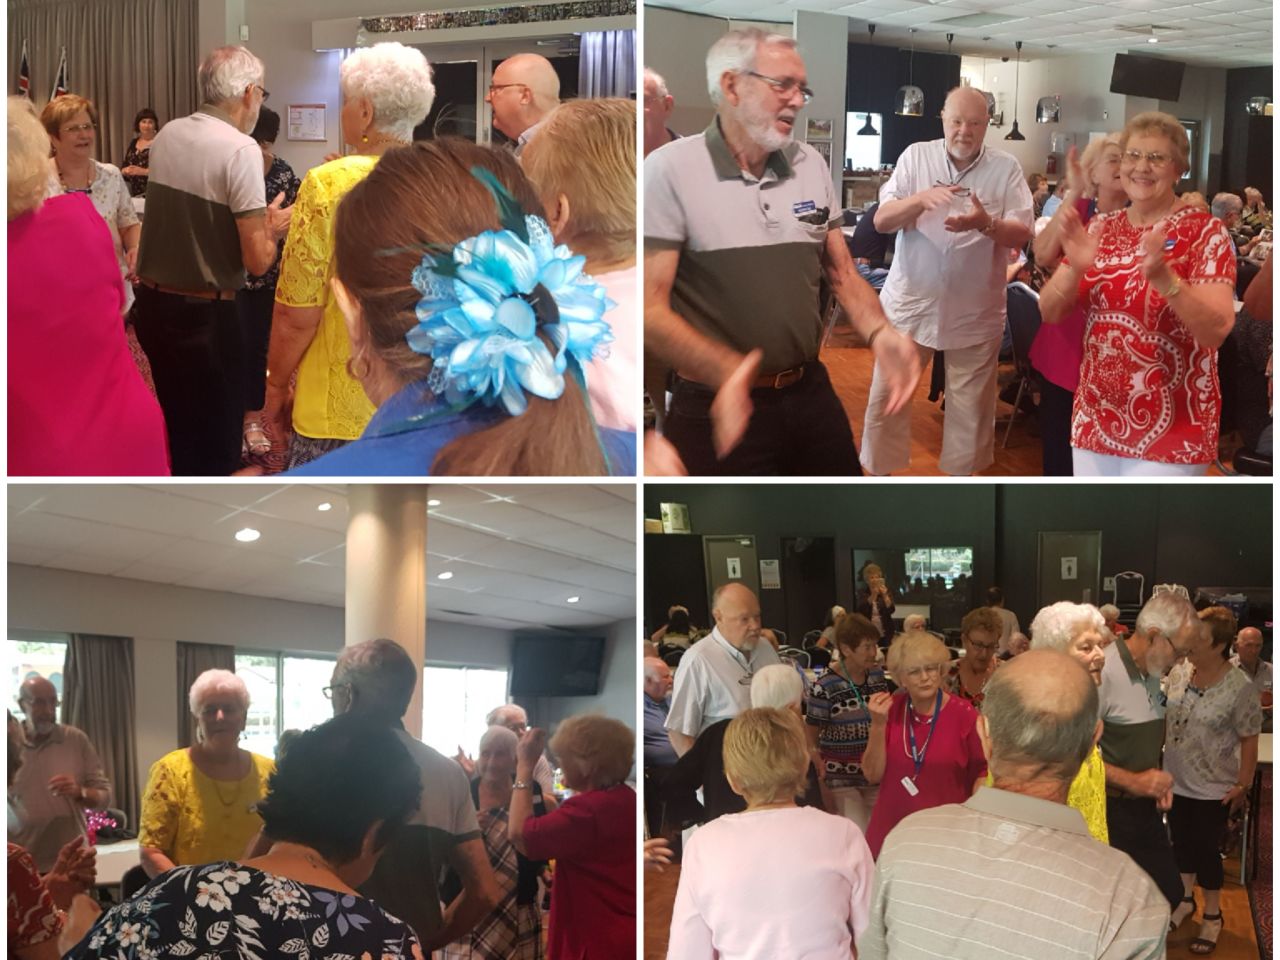 Singing, dancing, laughing and enjoying our guest entertainer Jay Turner. Our Calamvale members know how to live life and have fun fun fun.